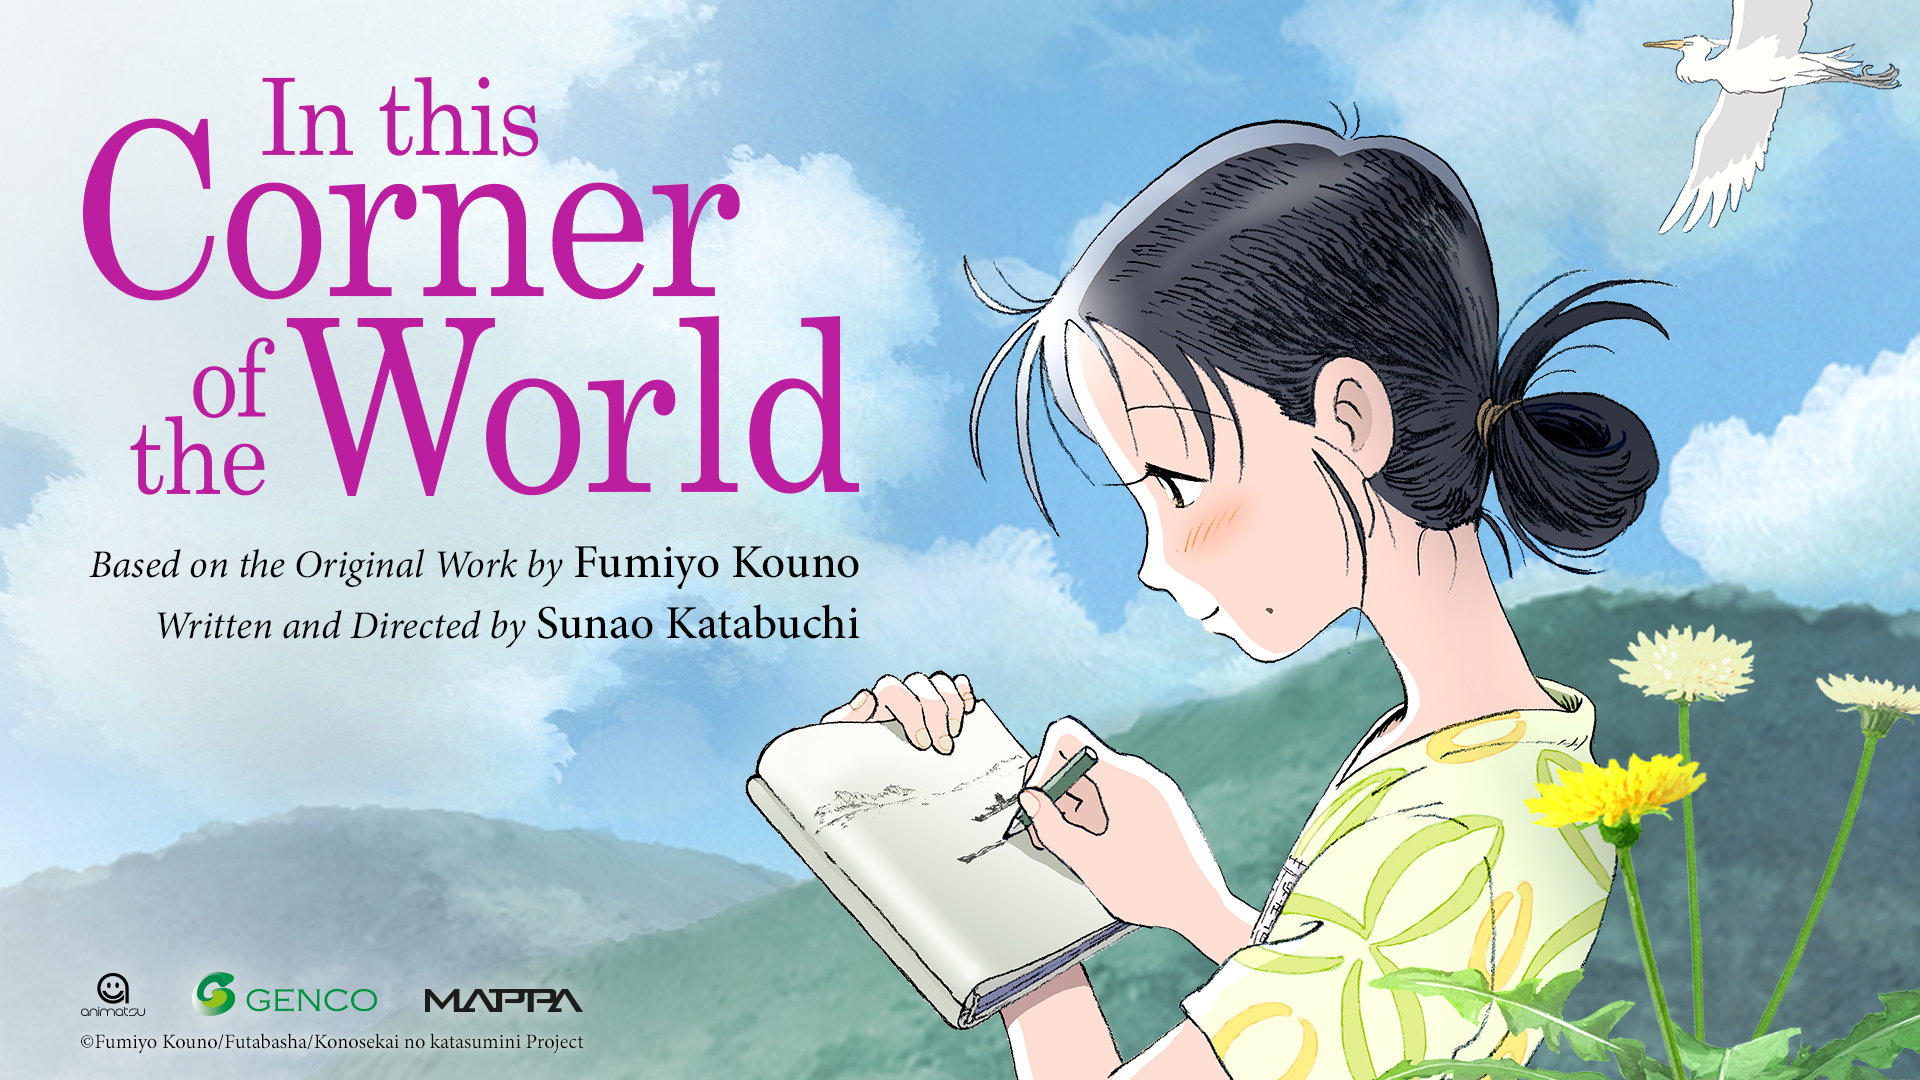 In this corner of the world, anime, japanese, asian pop, film